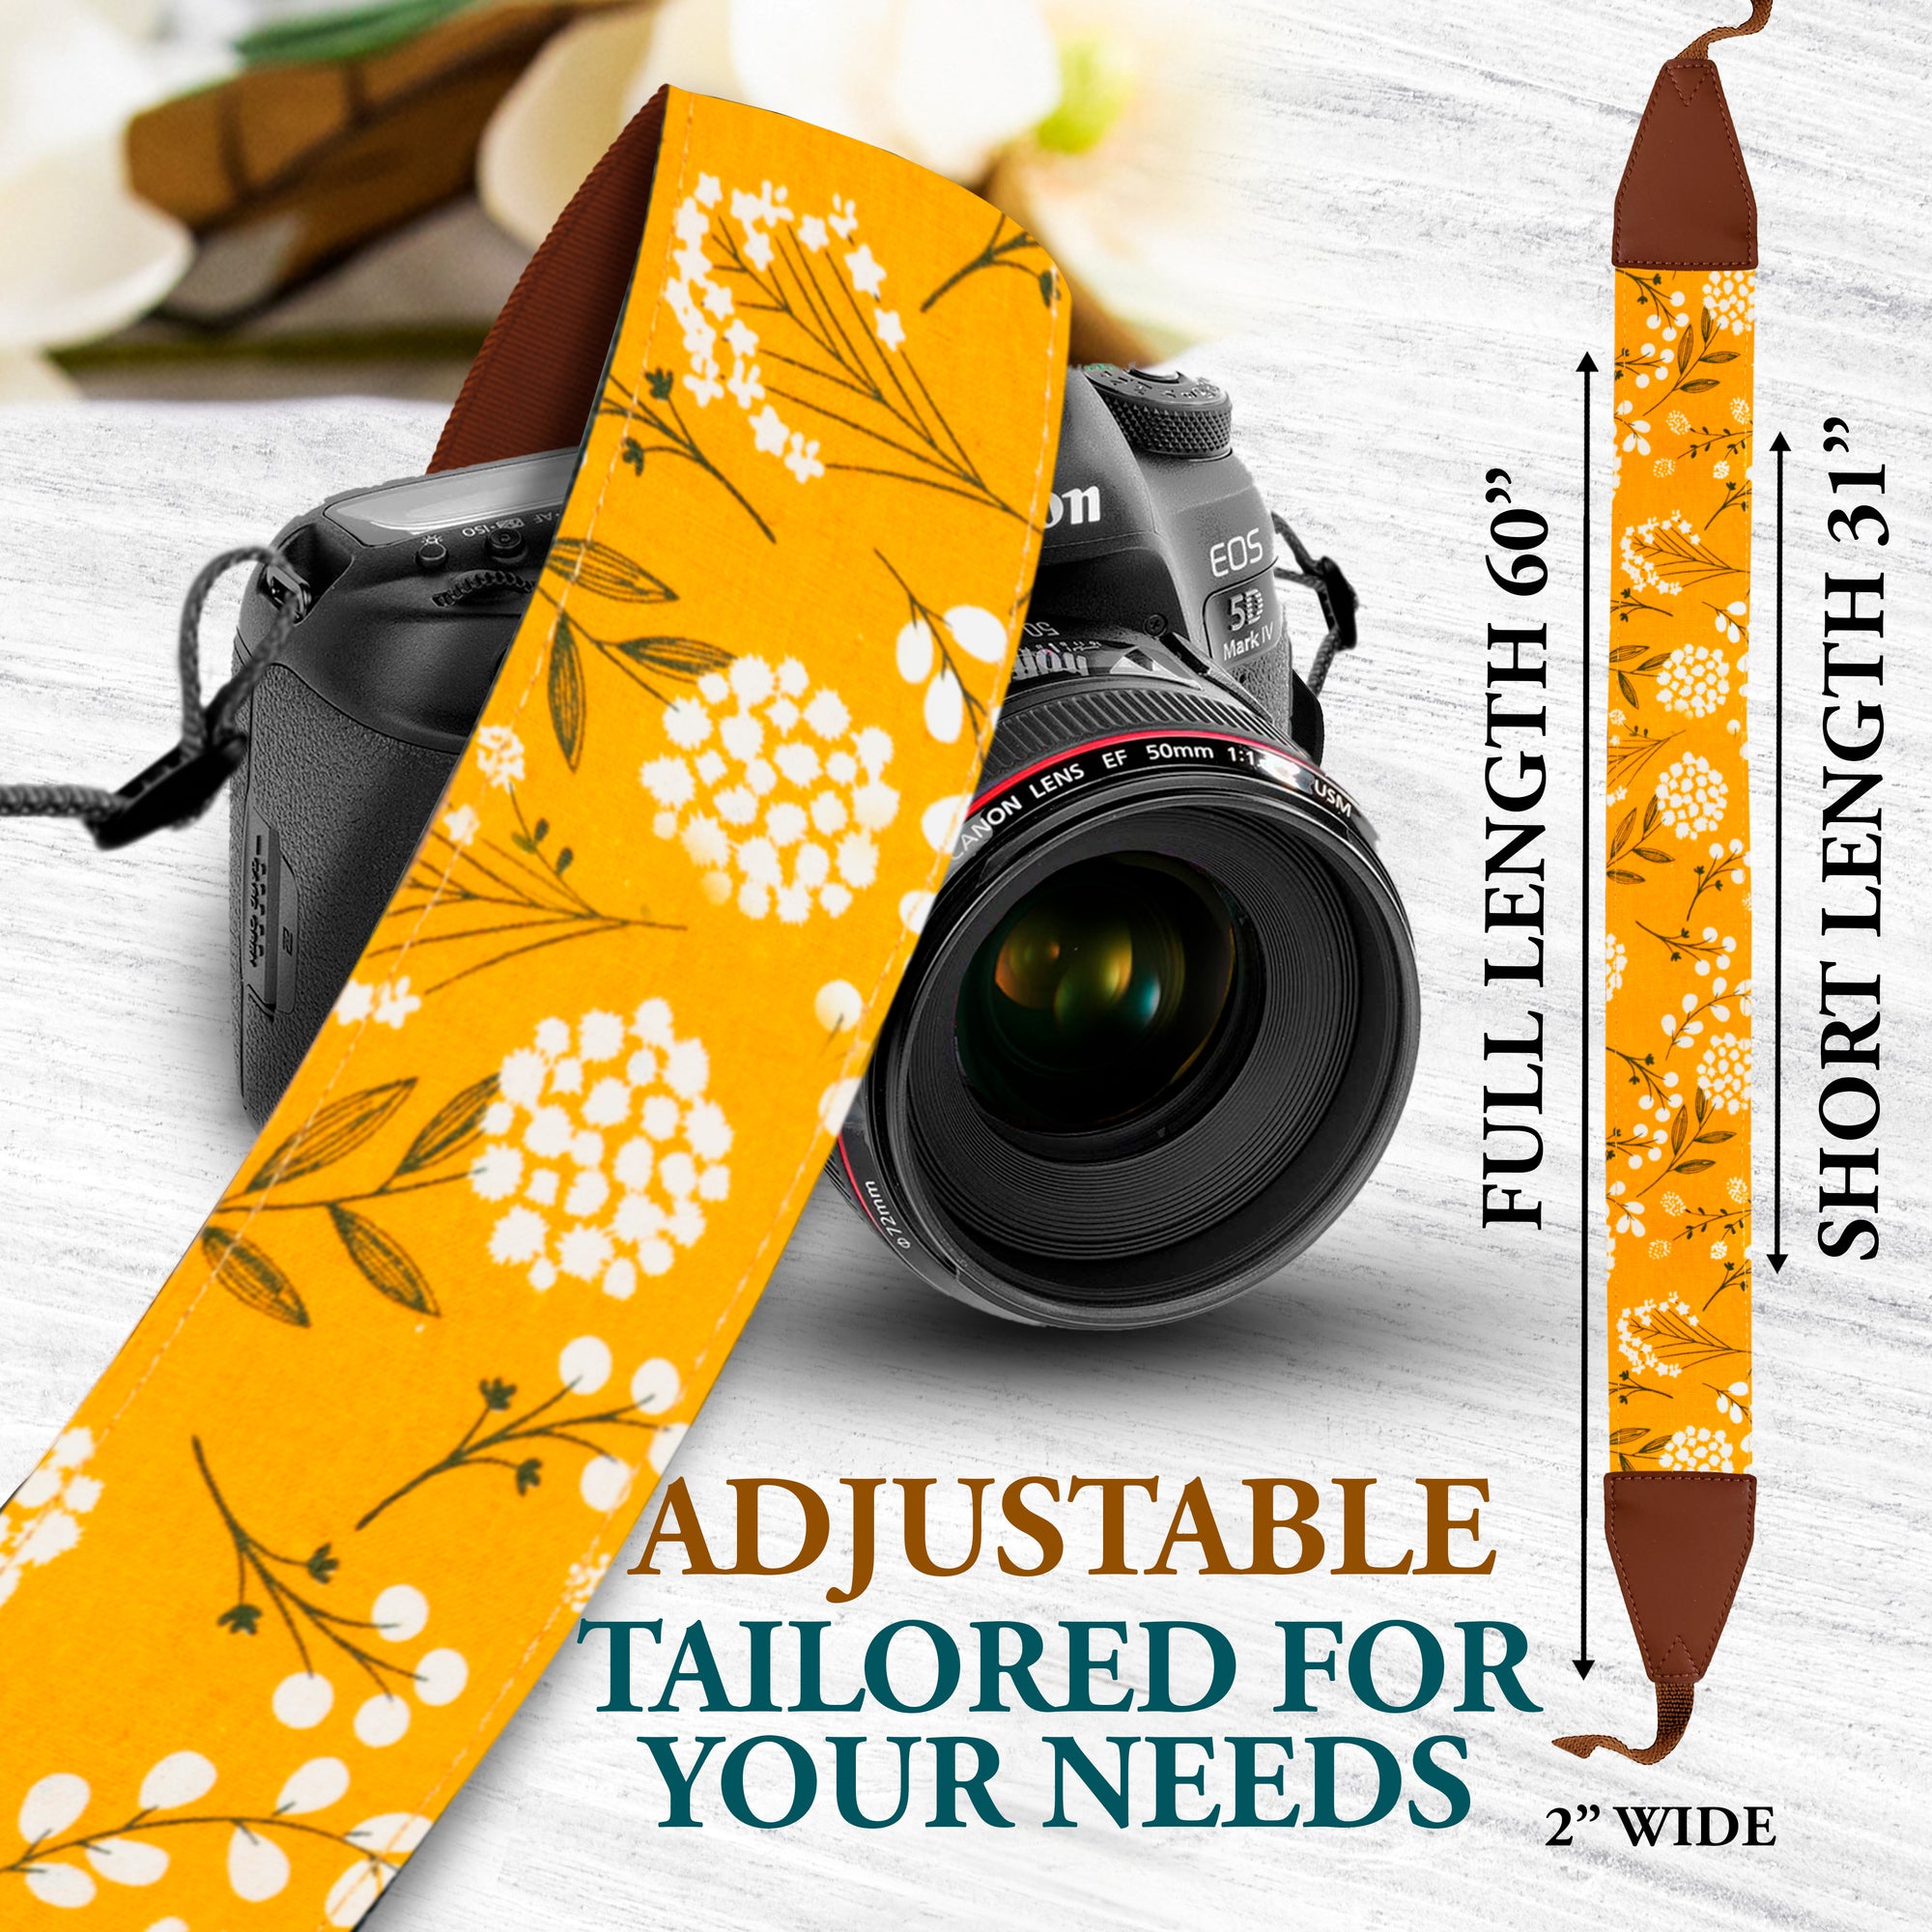 The DANDELION Camera Strap - Adjustable Camera strap for Nikon, Canon, Sony and all kinds of DSLR Cameras